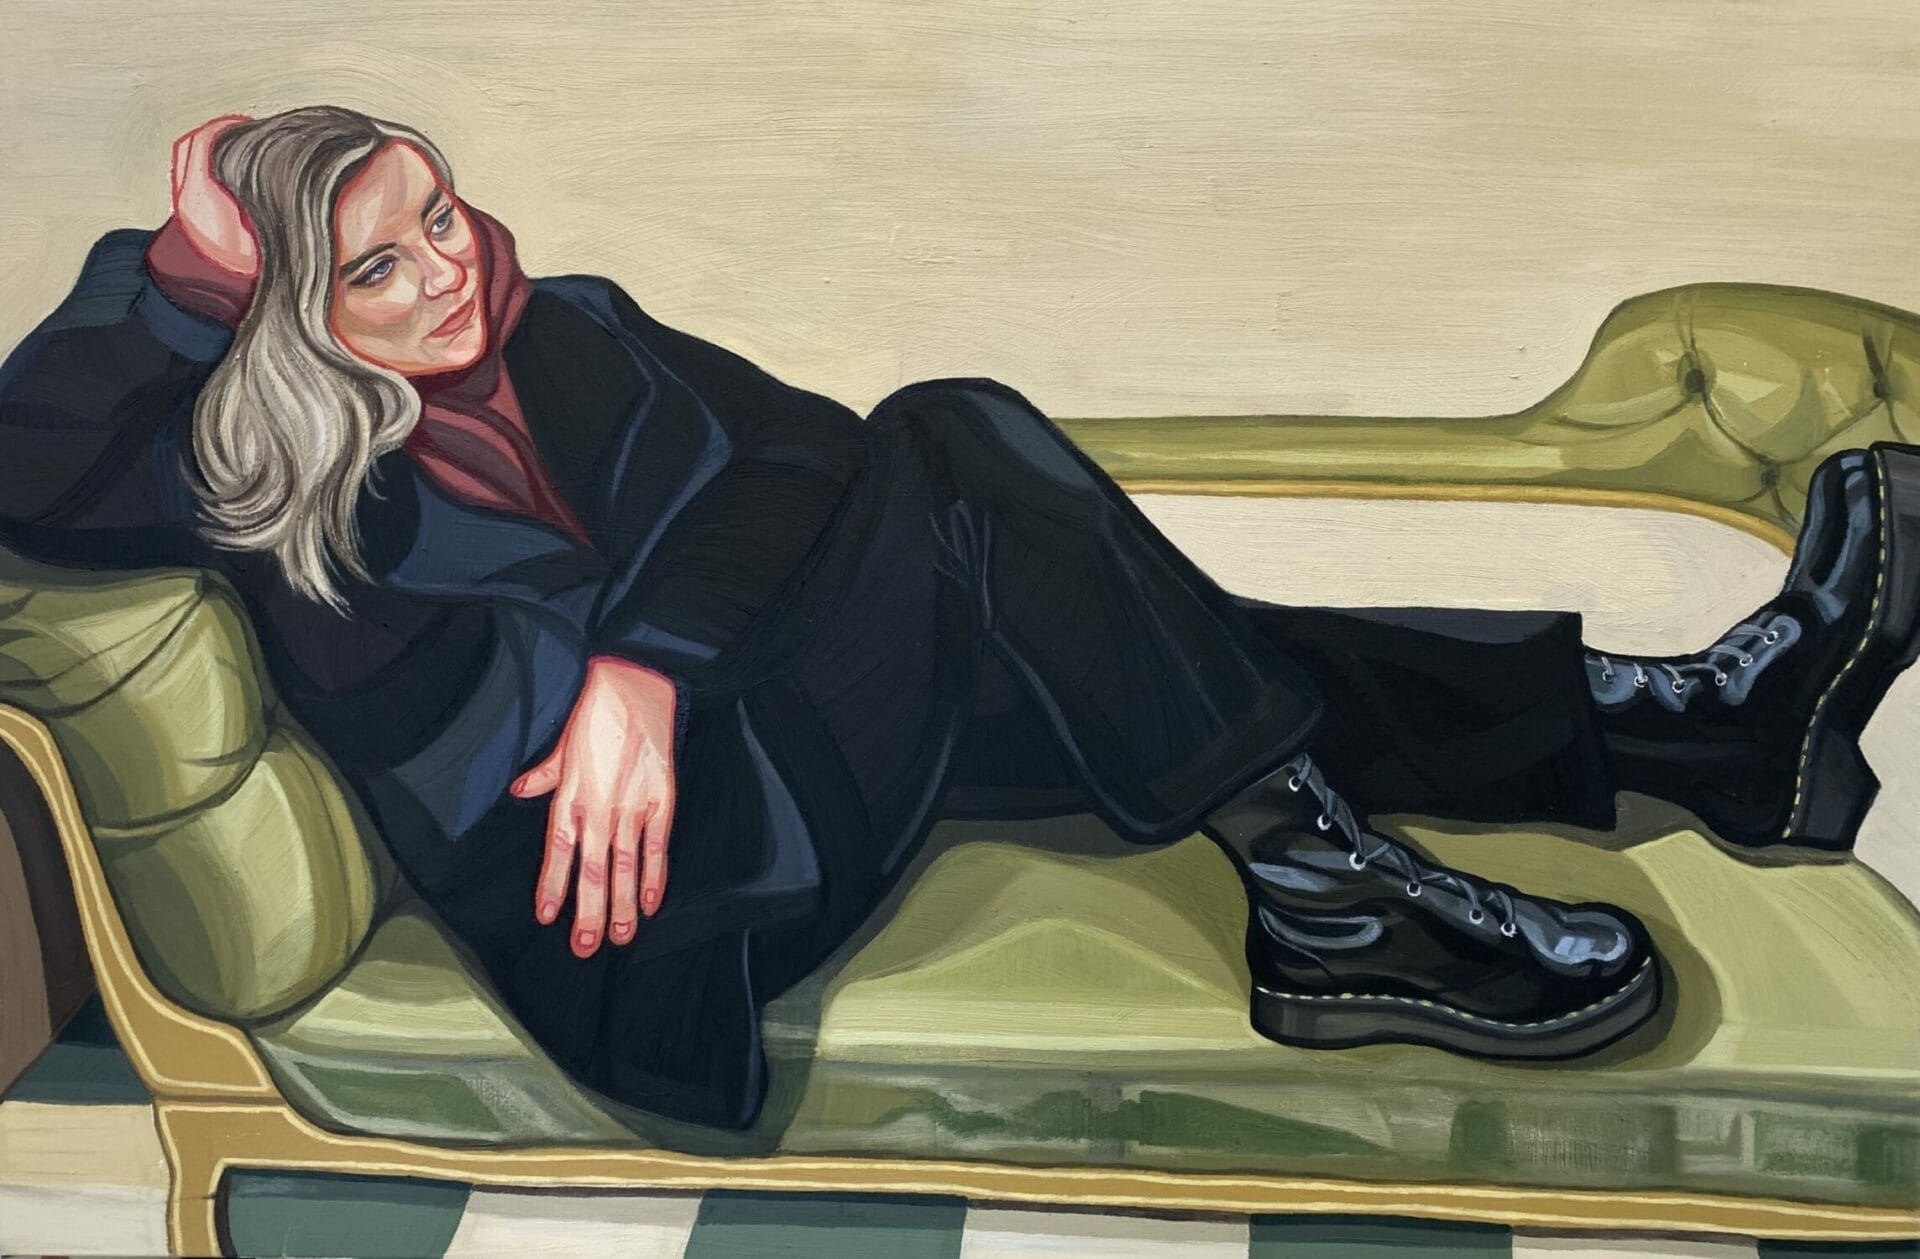 Dr Martens 150 x 100cm oil on canvas Ania Hobson scaled 1